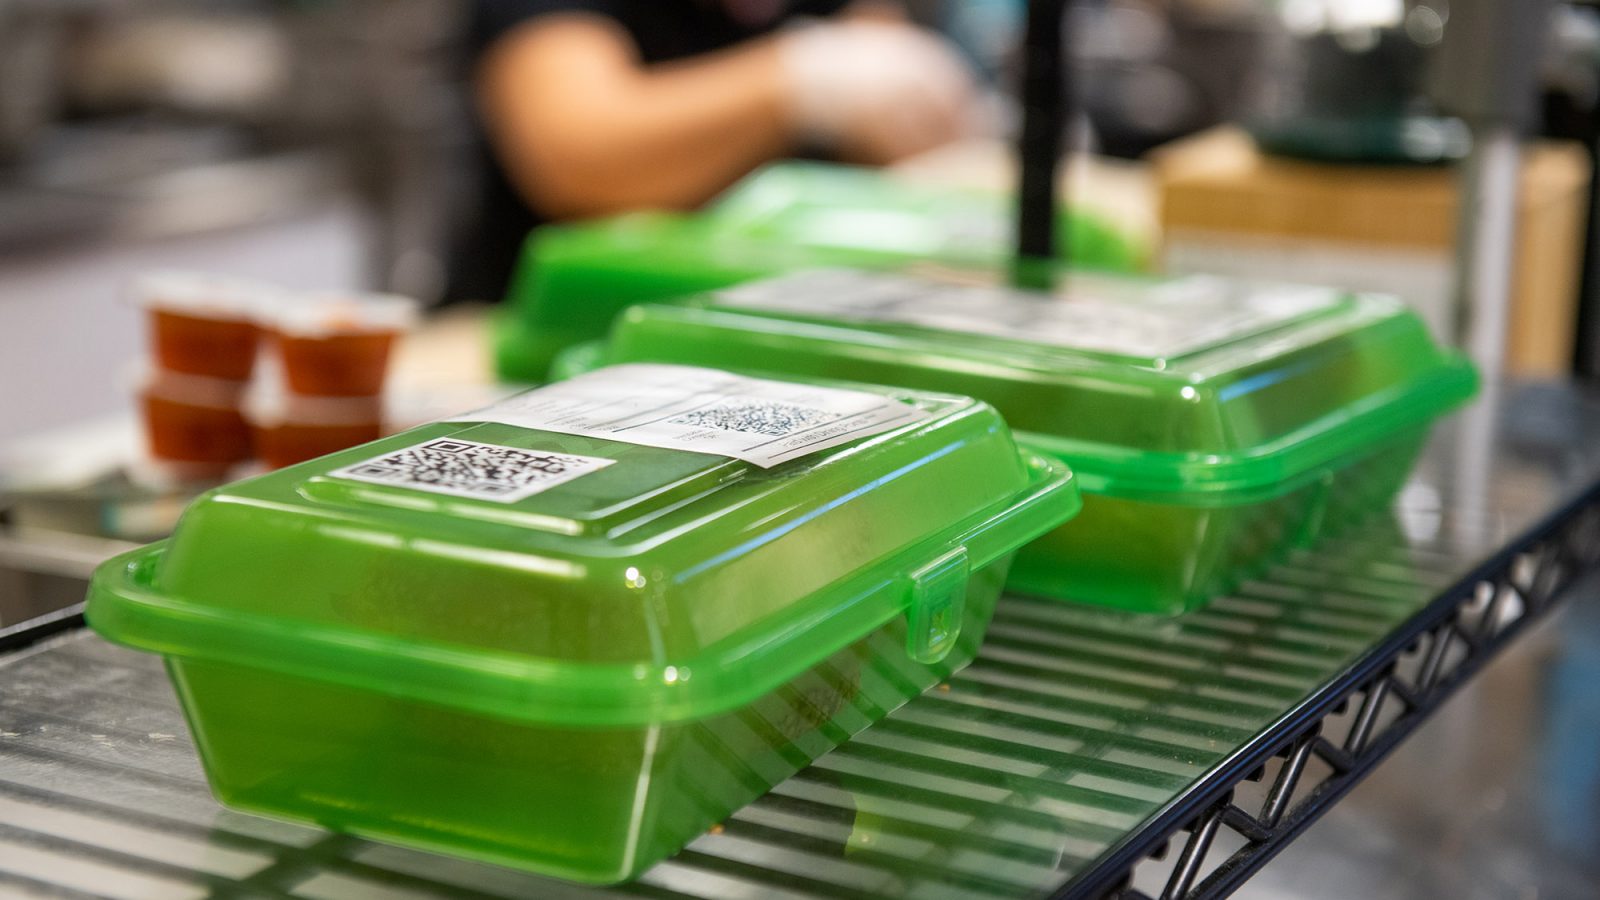 Going Green: Reusable Container Initiative Starts at GSU